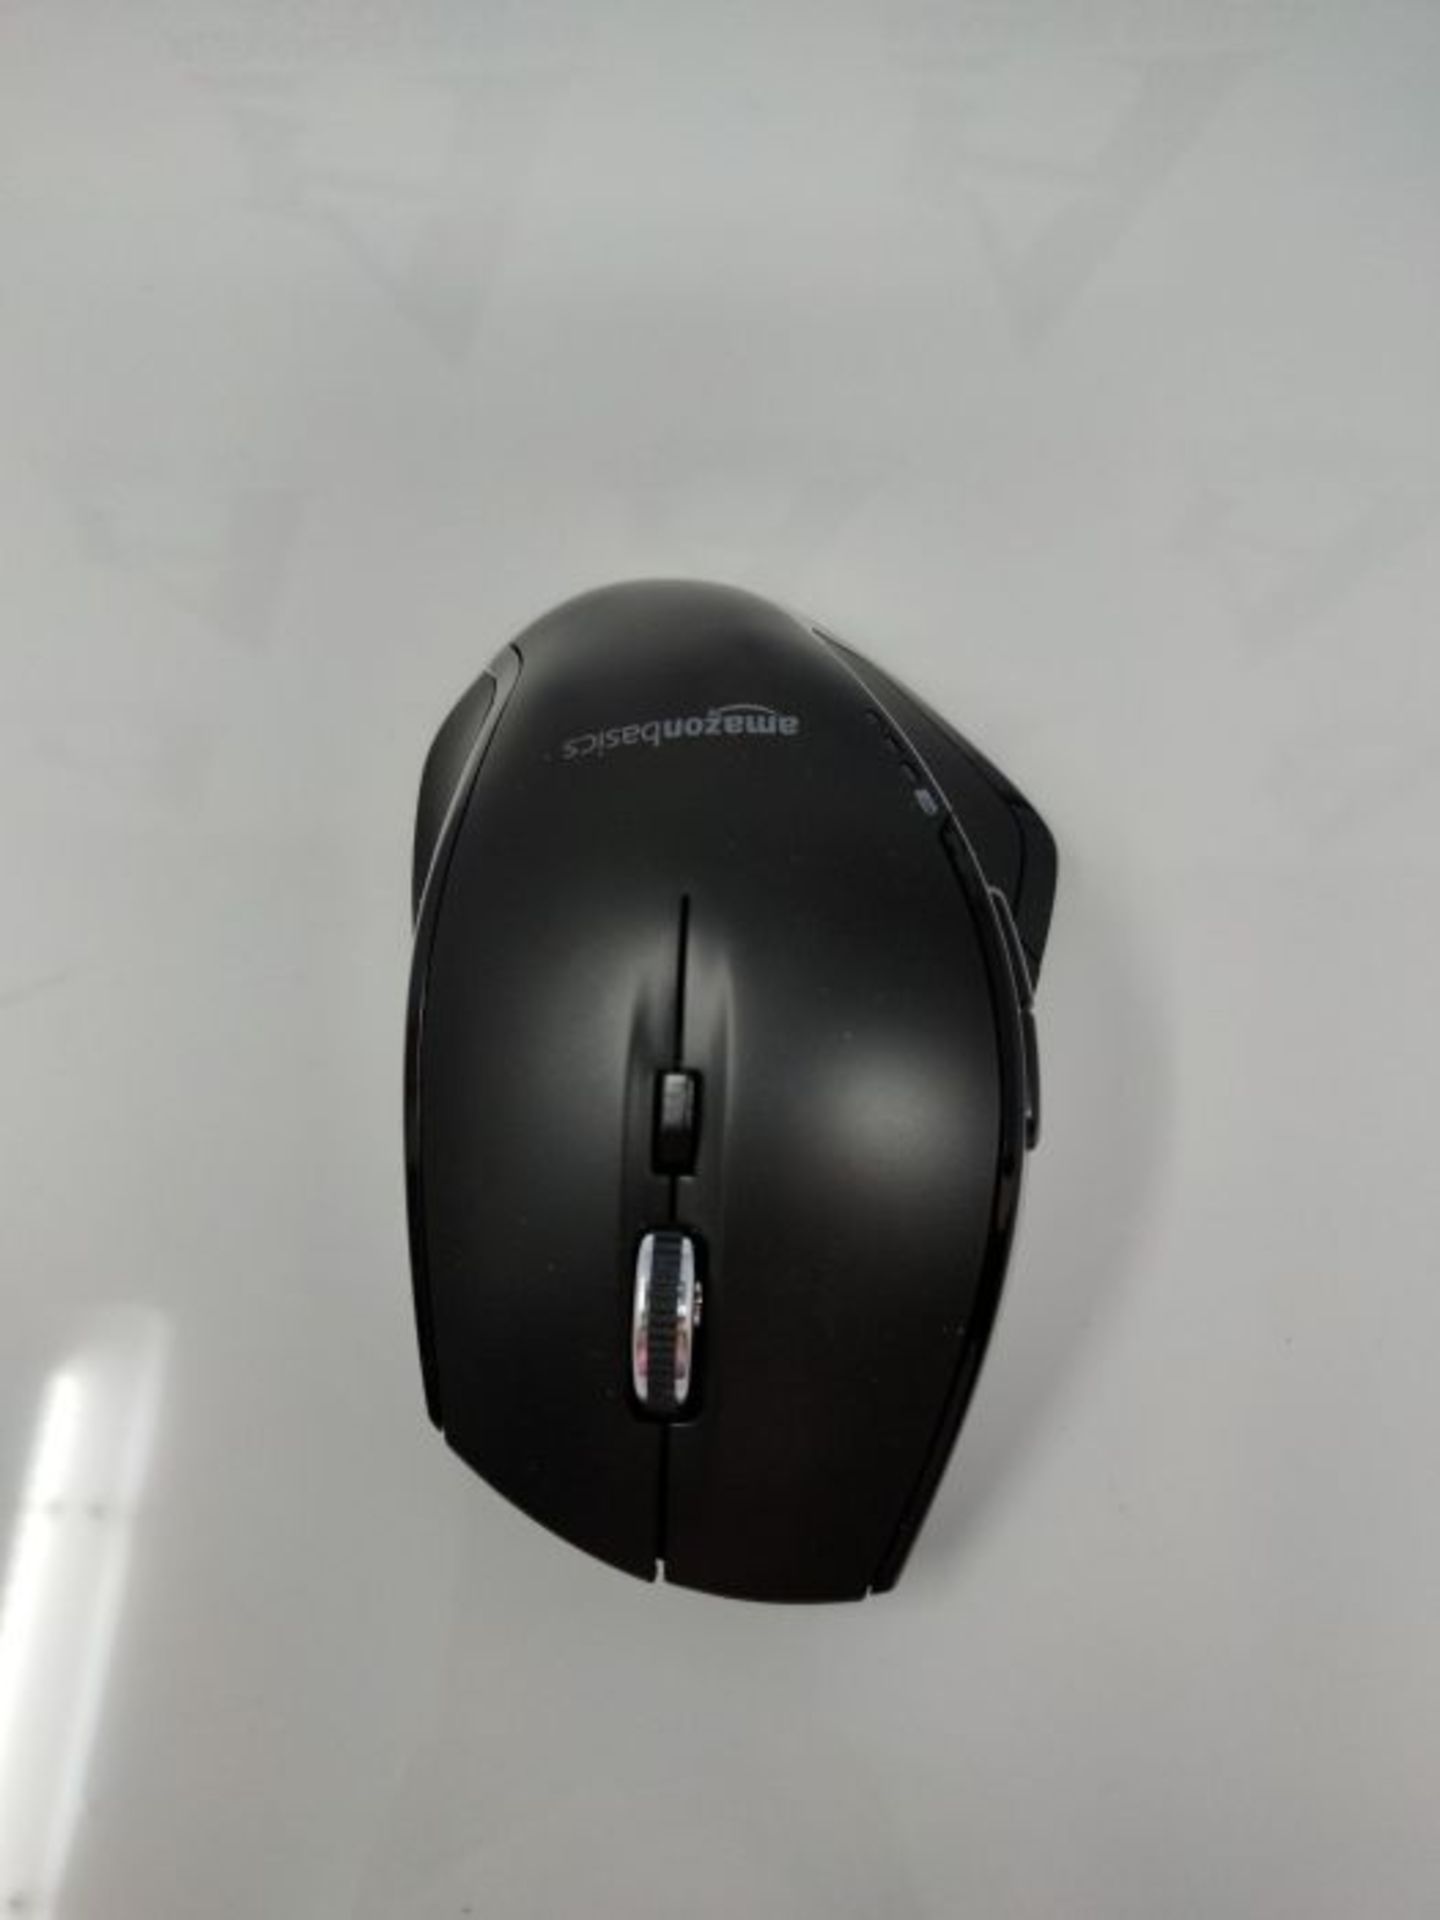 [INCOMPLETE] Amazon Basics - Ergonomische kabellose Maus mit Schnell-Scrolling, normal - Image 2 of 2